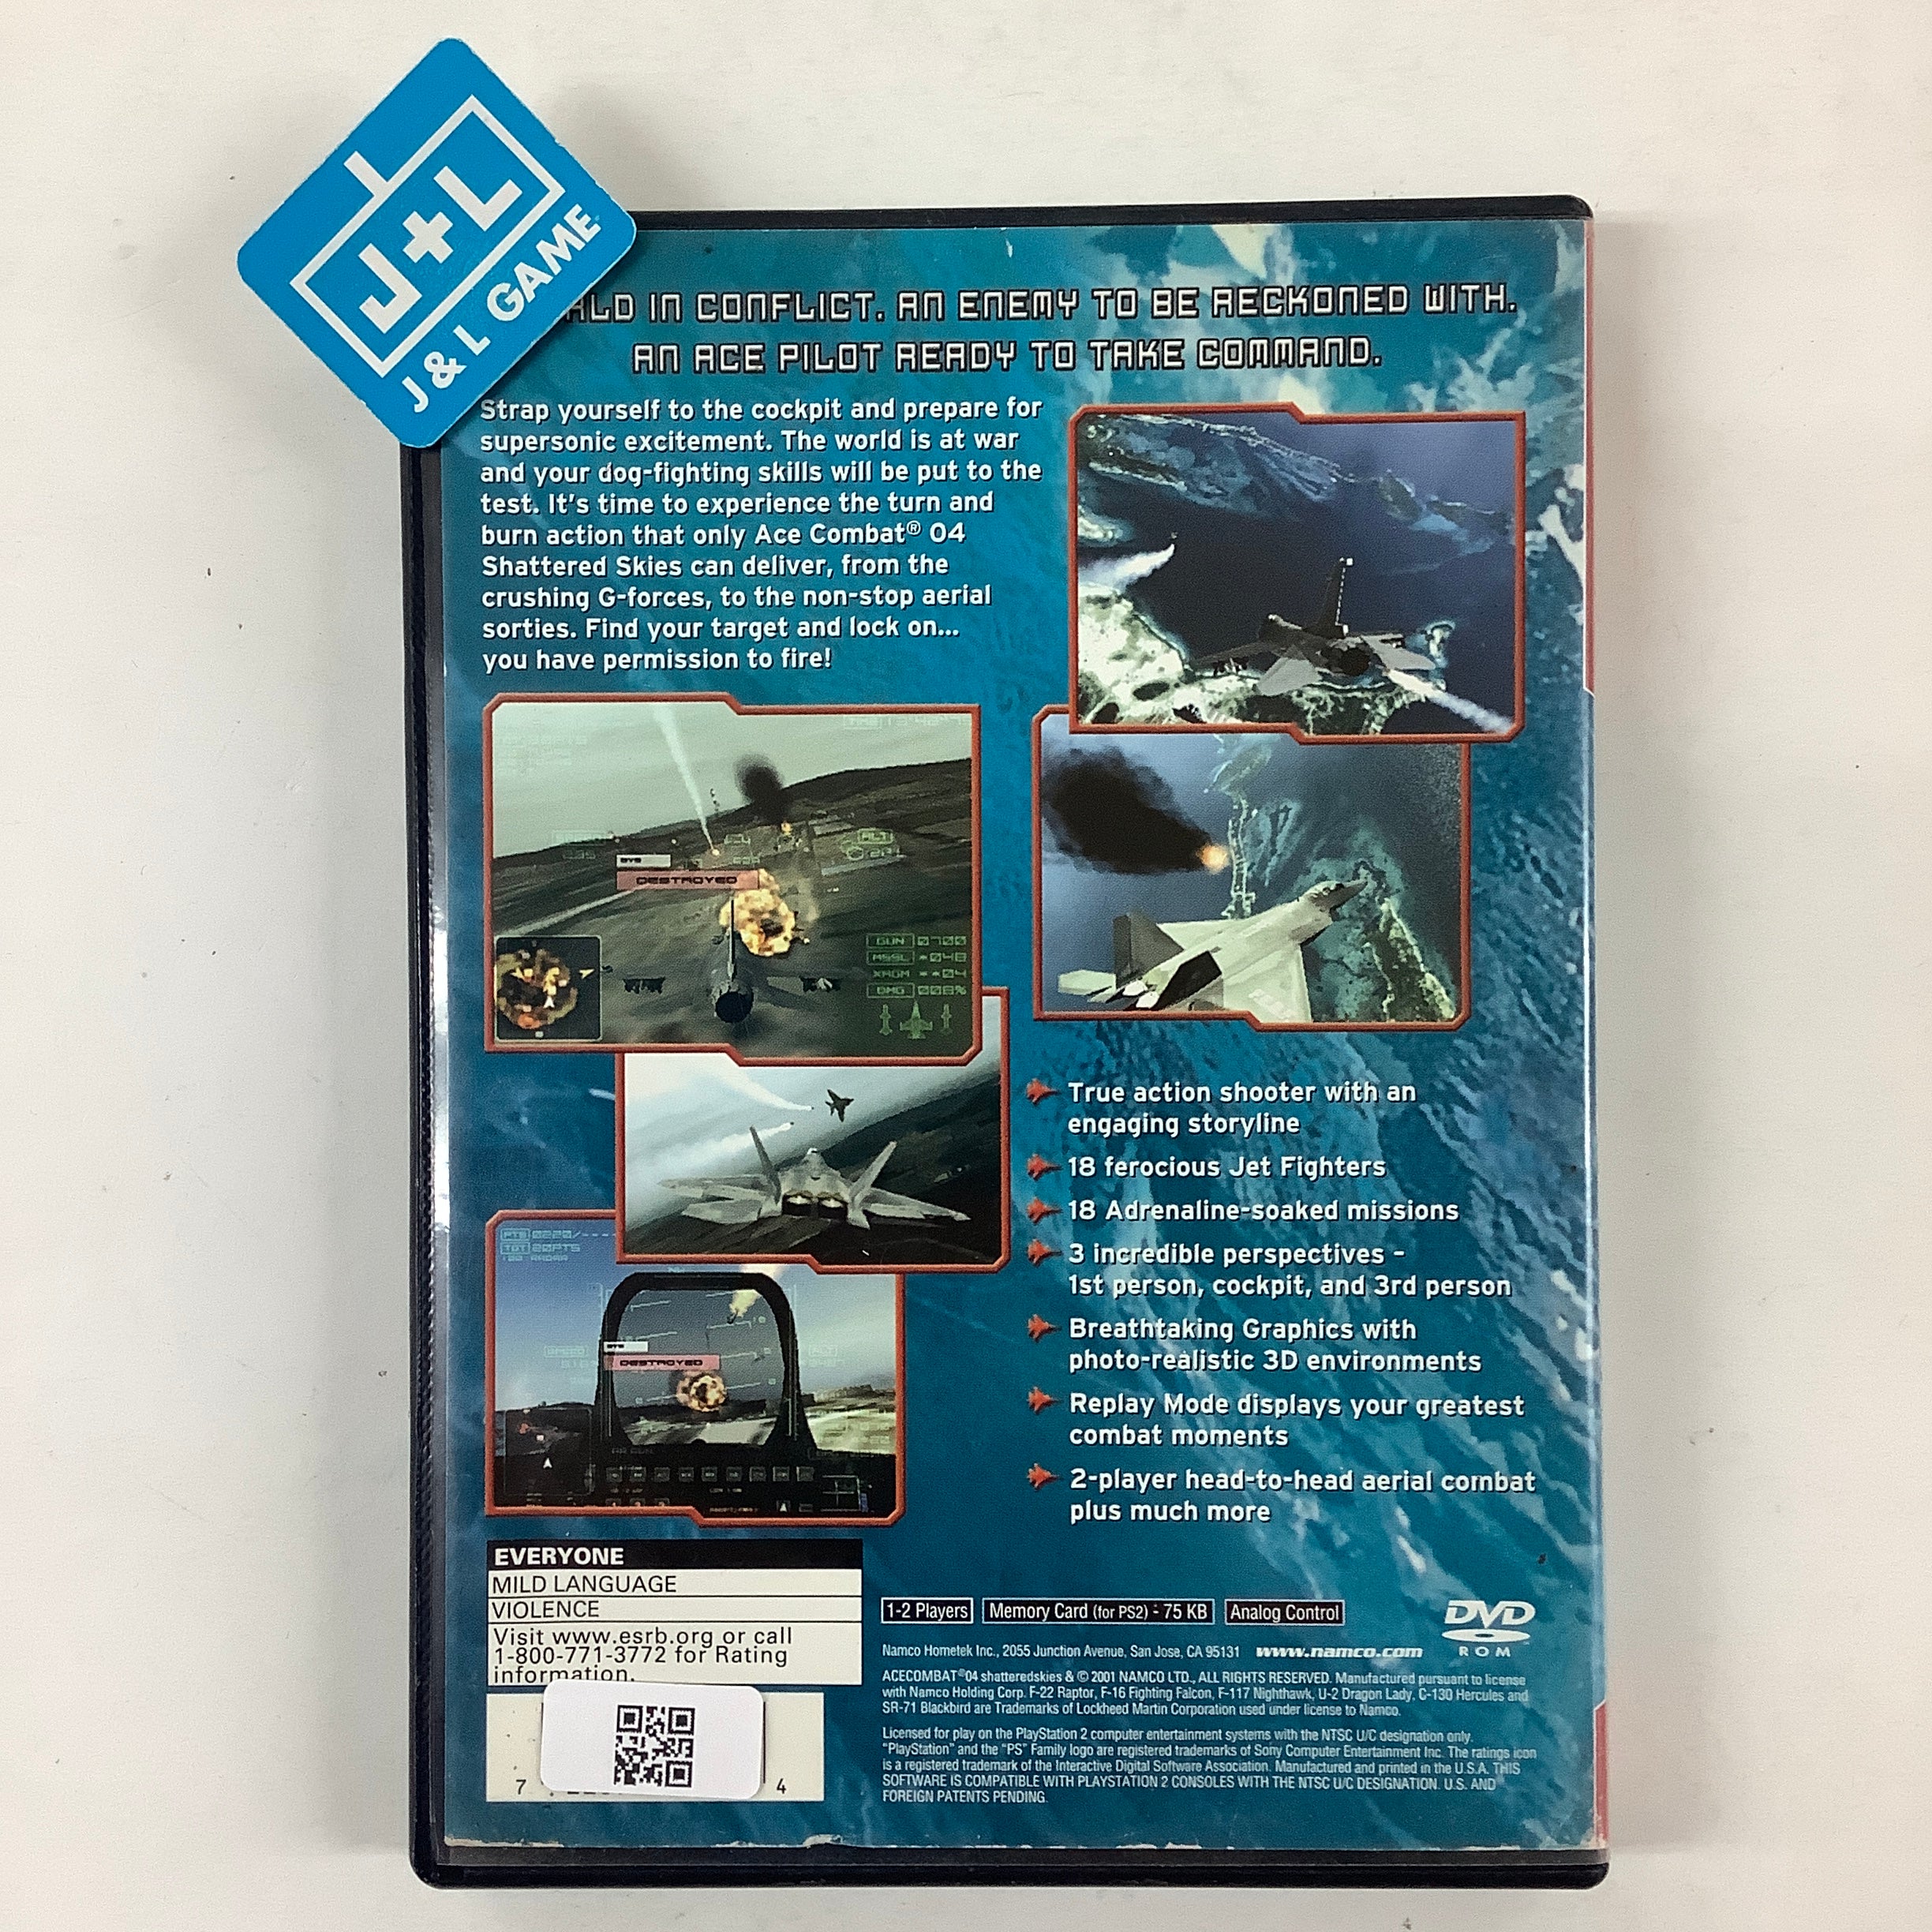 Ace Combat 04: Shattered Skies (Greatest Hits) - (PS2) PlayStation 2 [Pre-Owned] Video Games Namco   